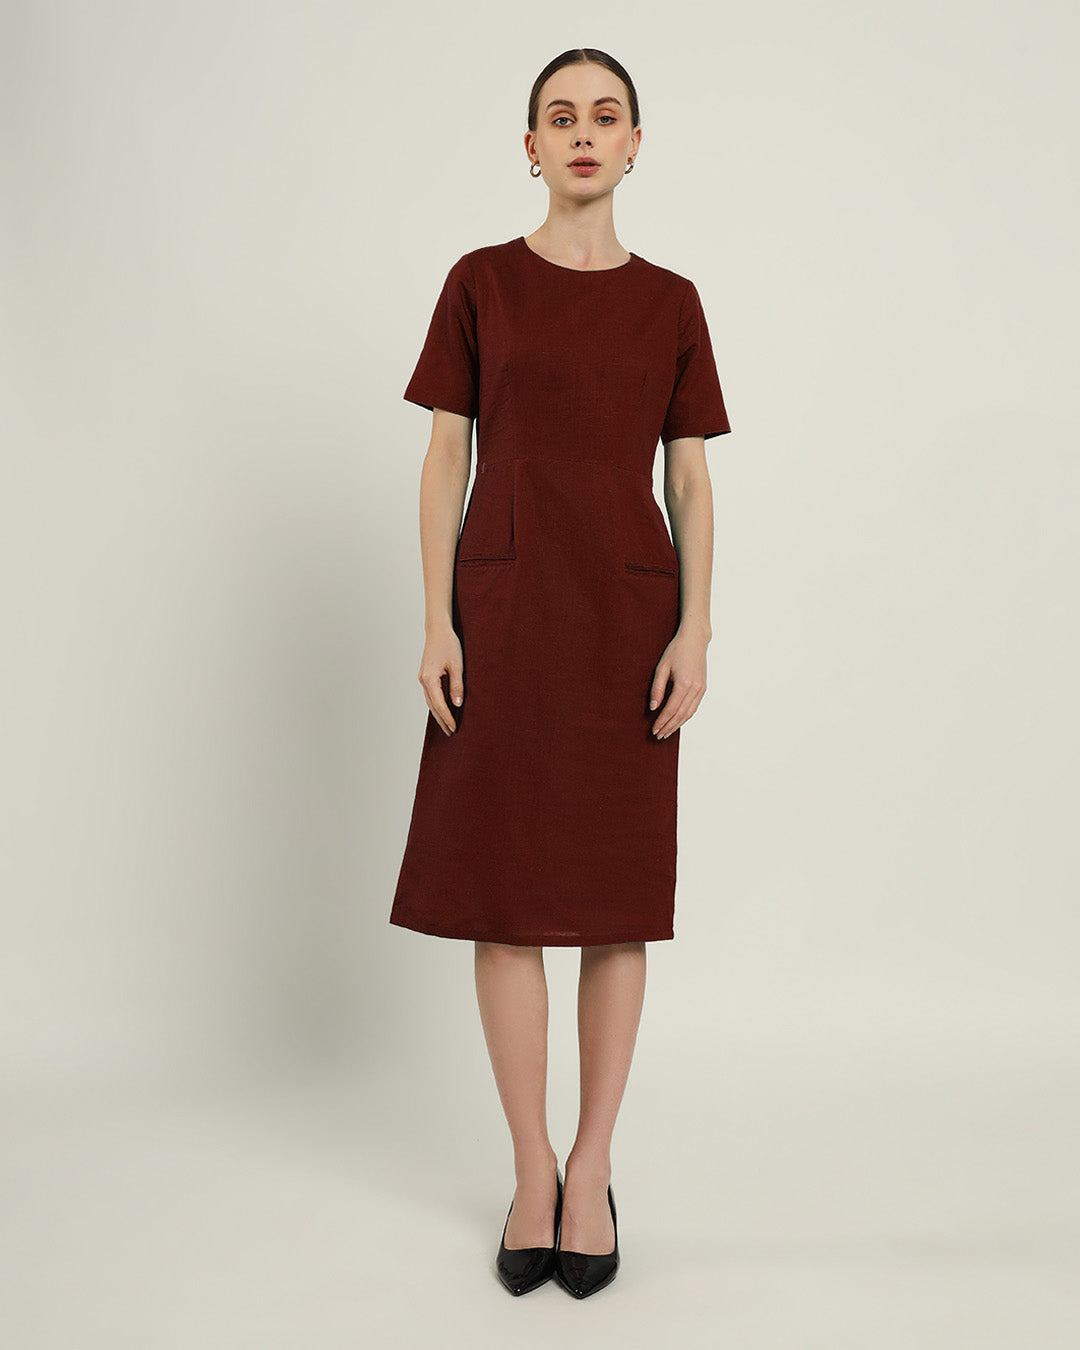 The Cairo Rouge Cotton Dress